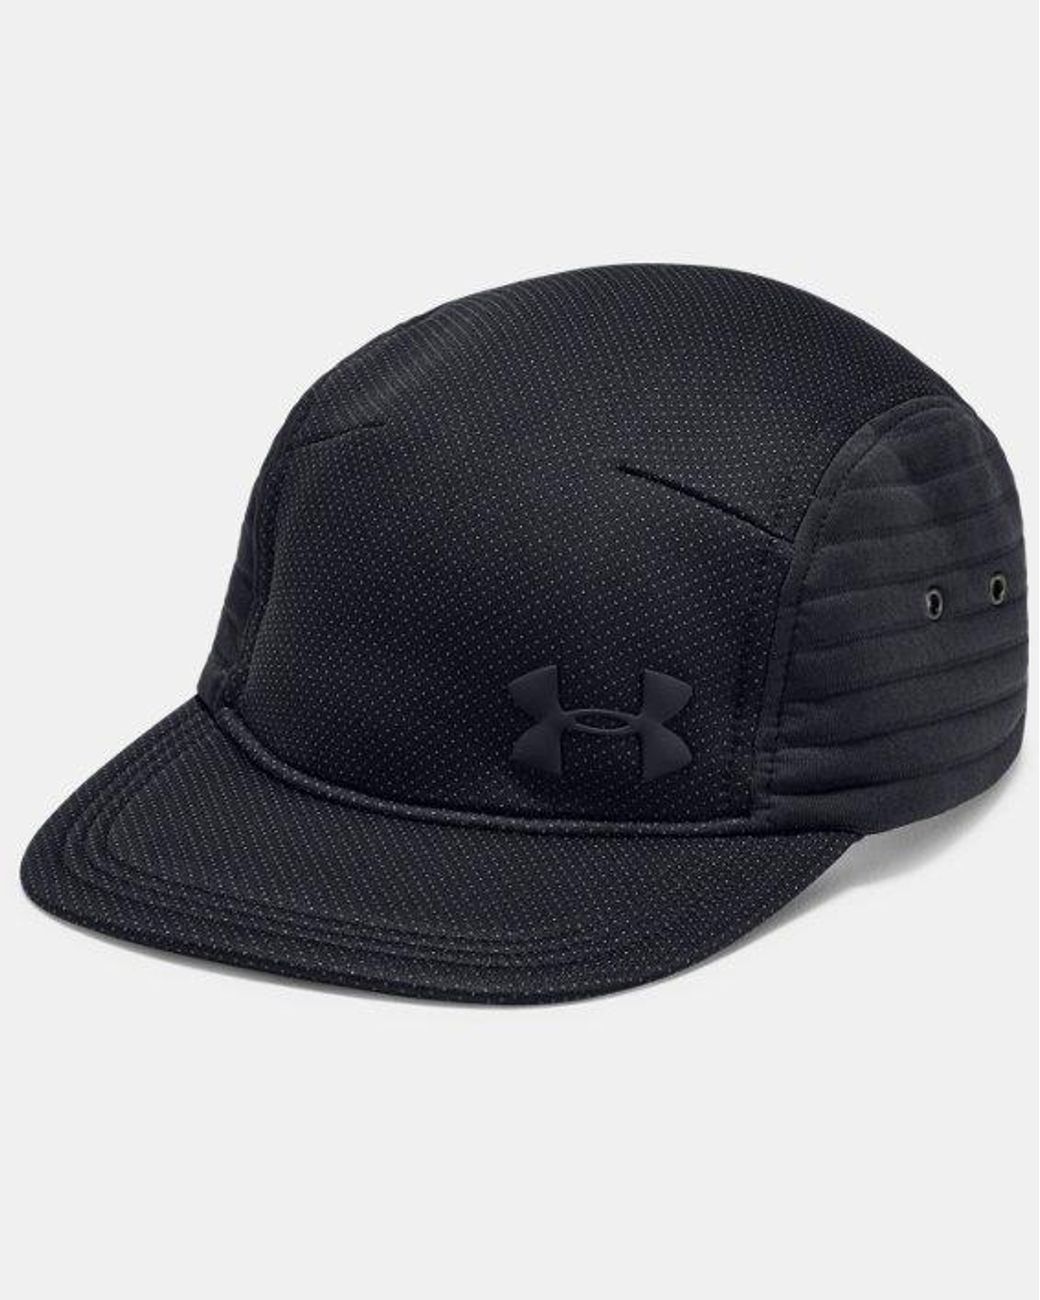 under armour 5 panel hat